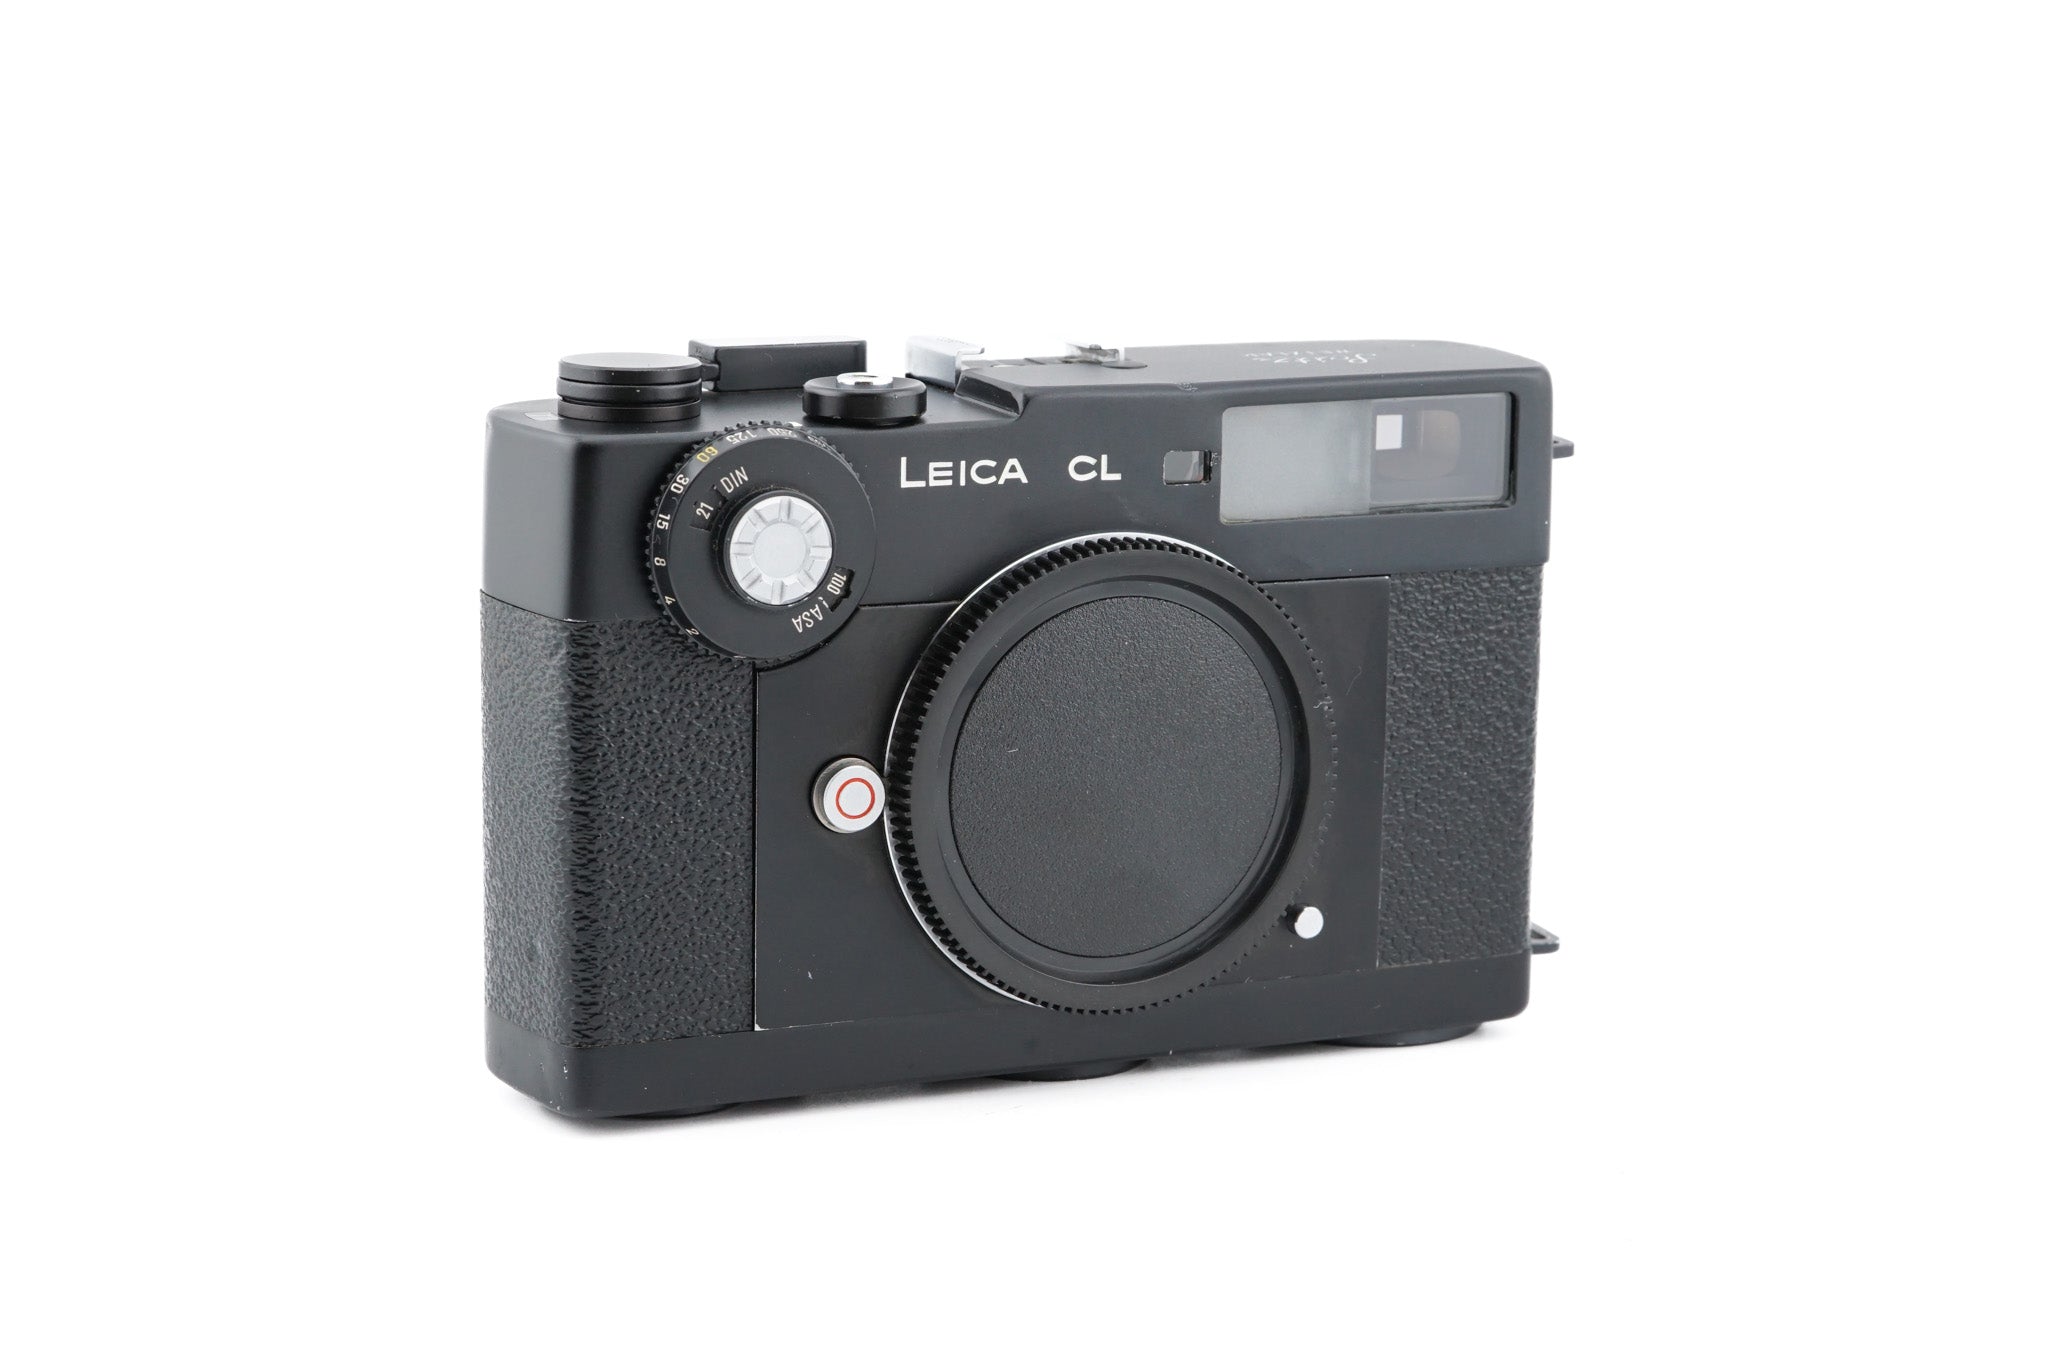 Leica CL - 35mm Film Camera body - with 6 month warranty